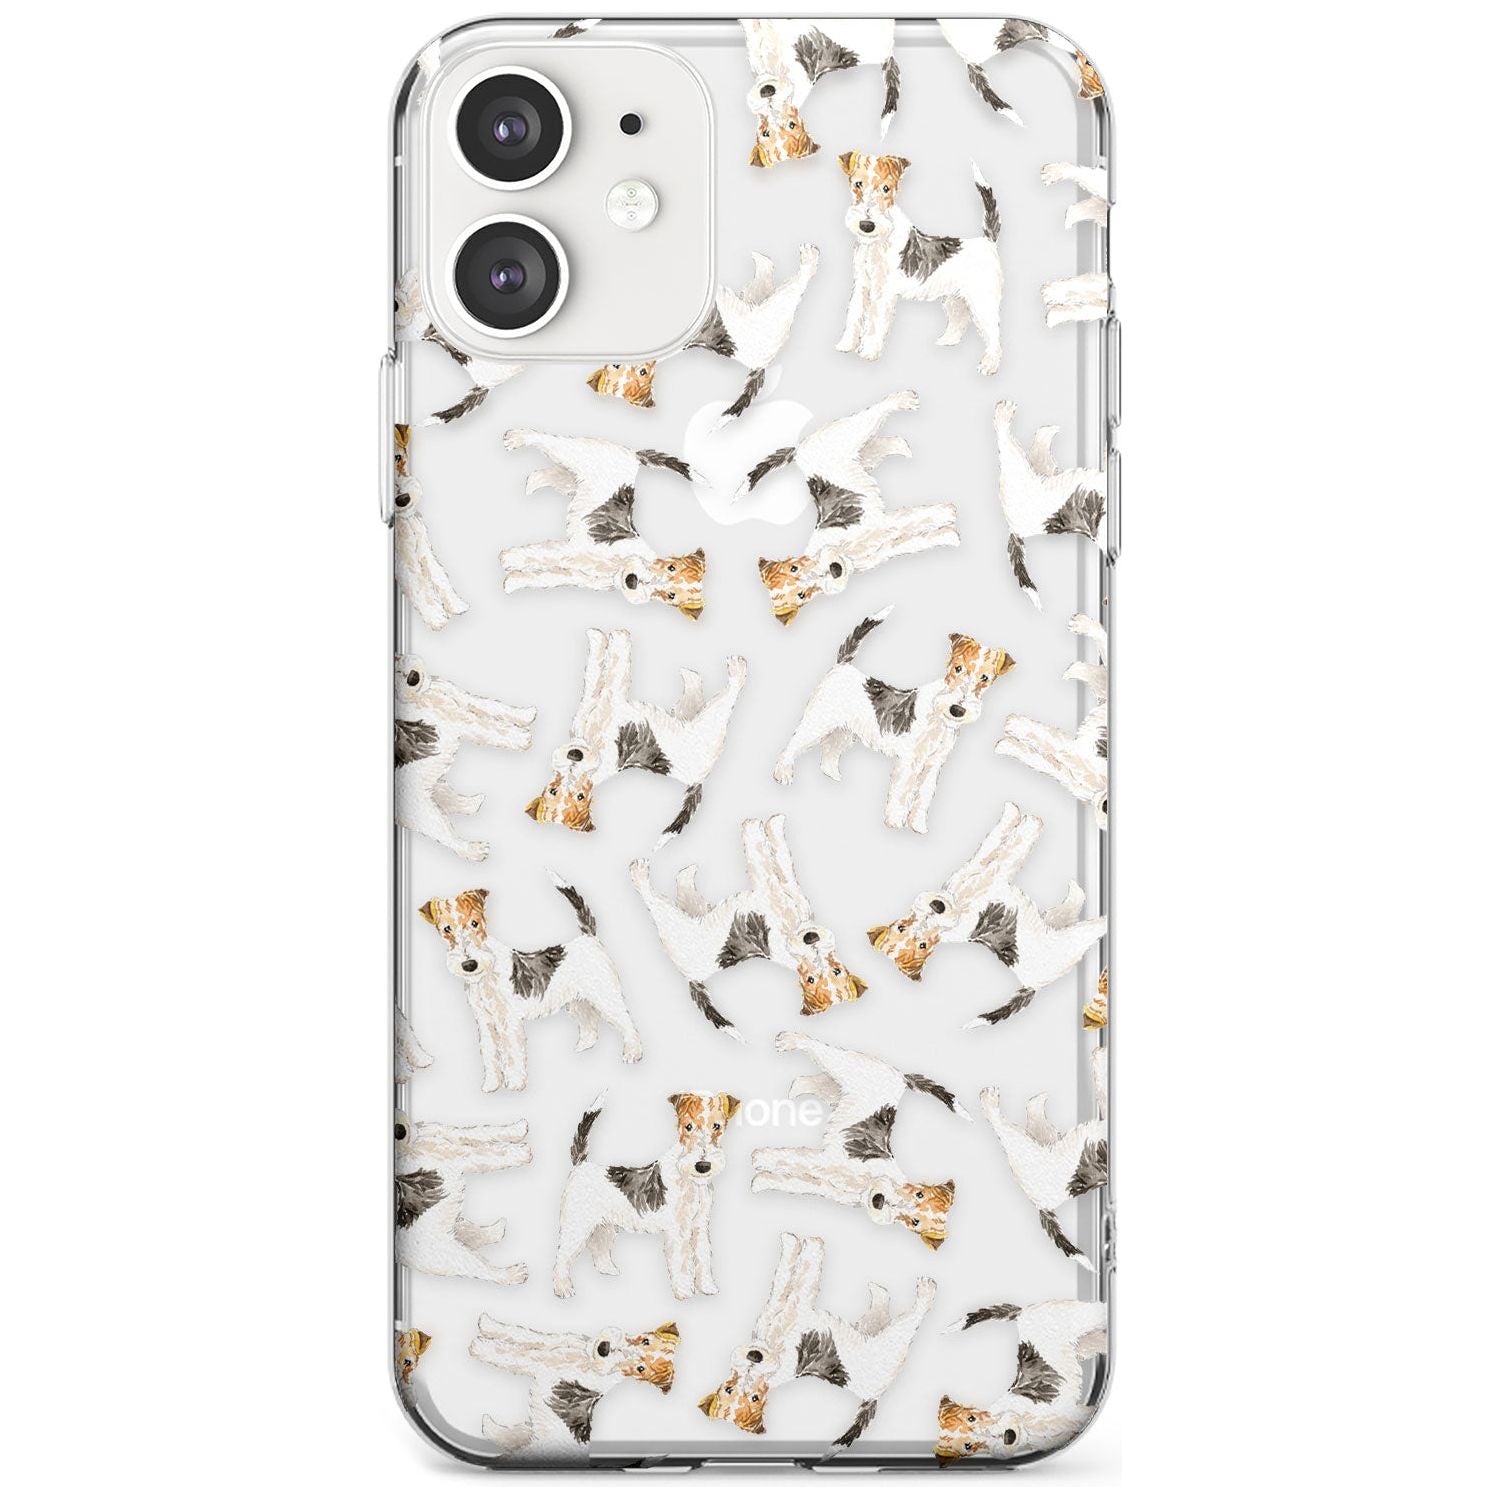 Wire Haired Fox Terrier Watercolour Dog Pattern Slim TPU Phone Case for iPhone 11